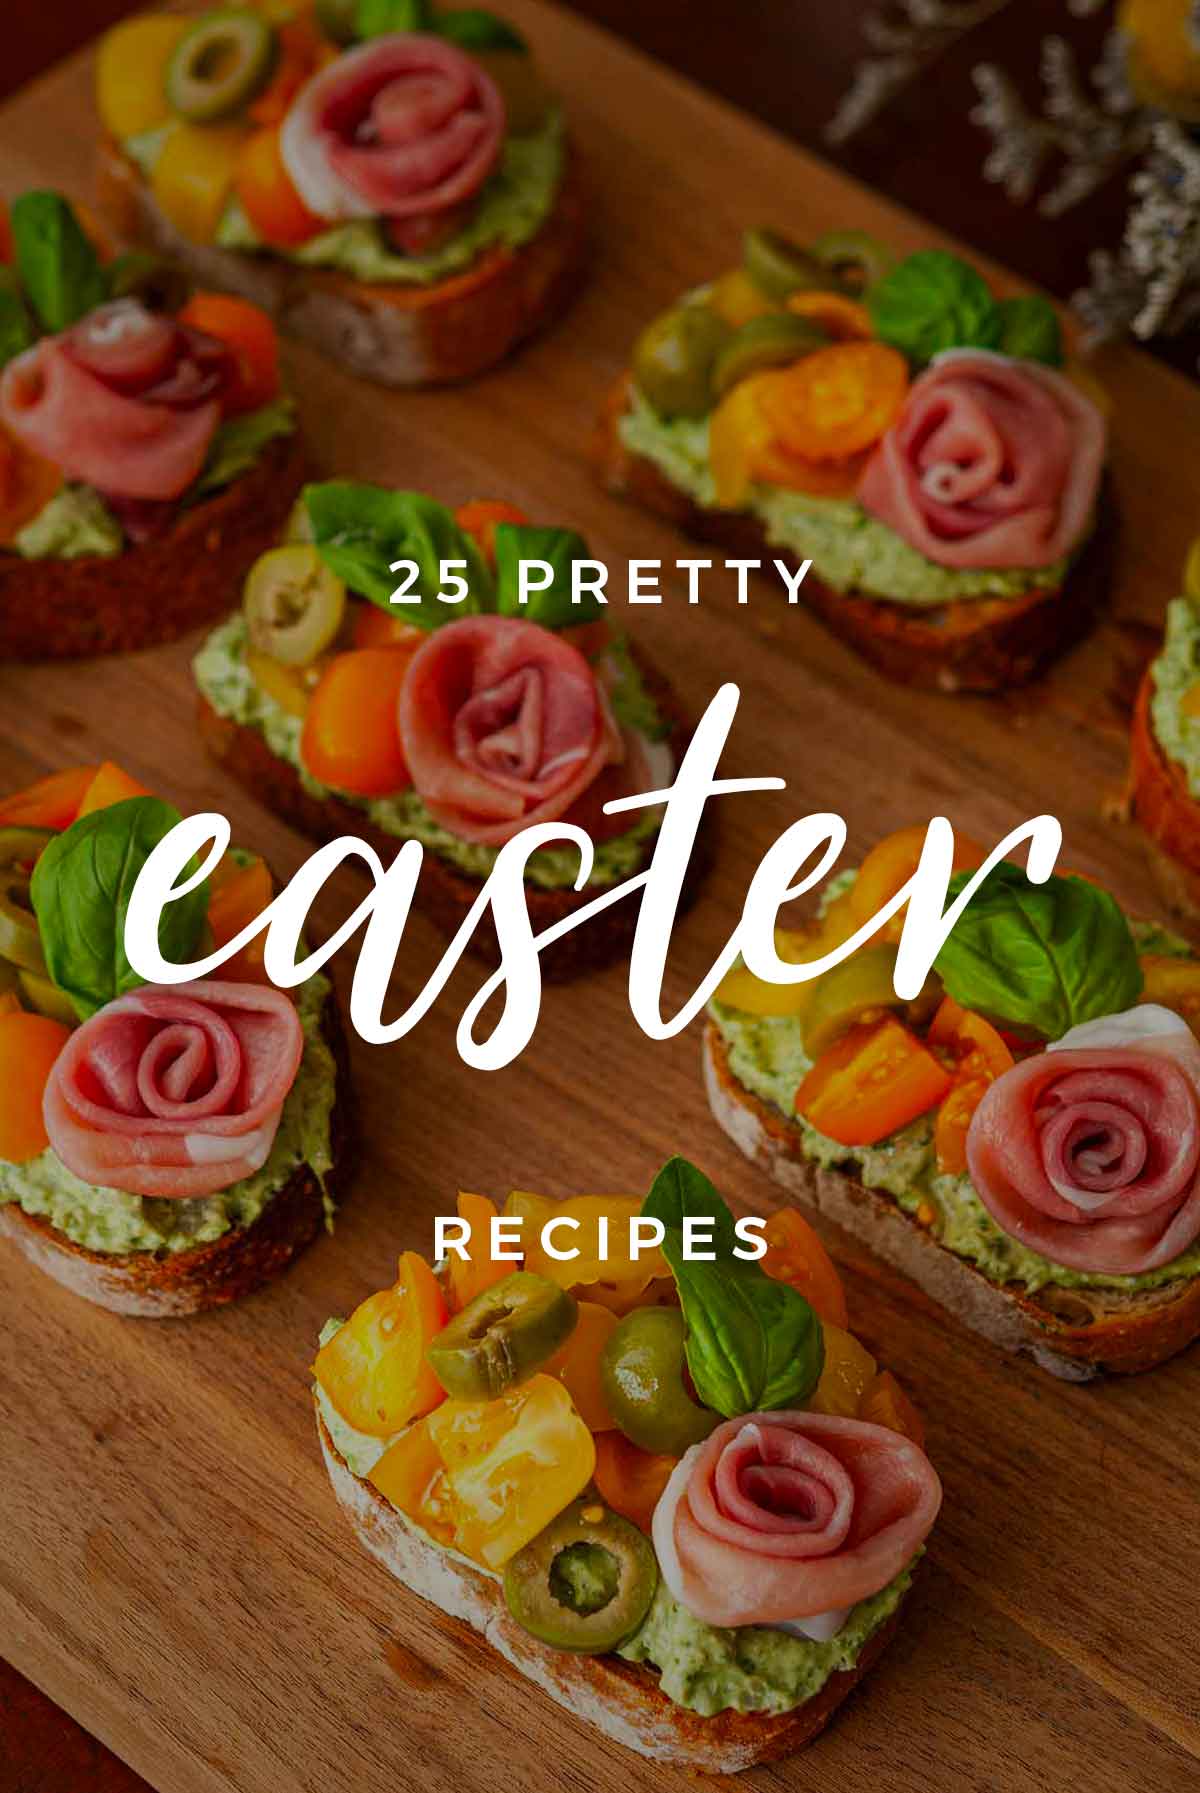 A plate of appetizers with a title that says "25 Pretty Easter Appetizers."